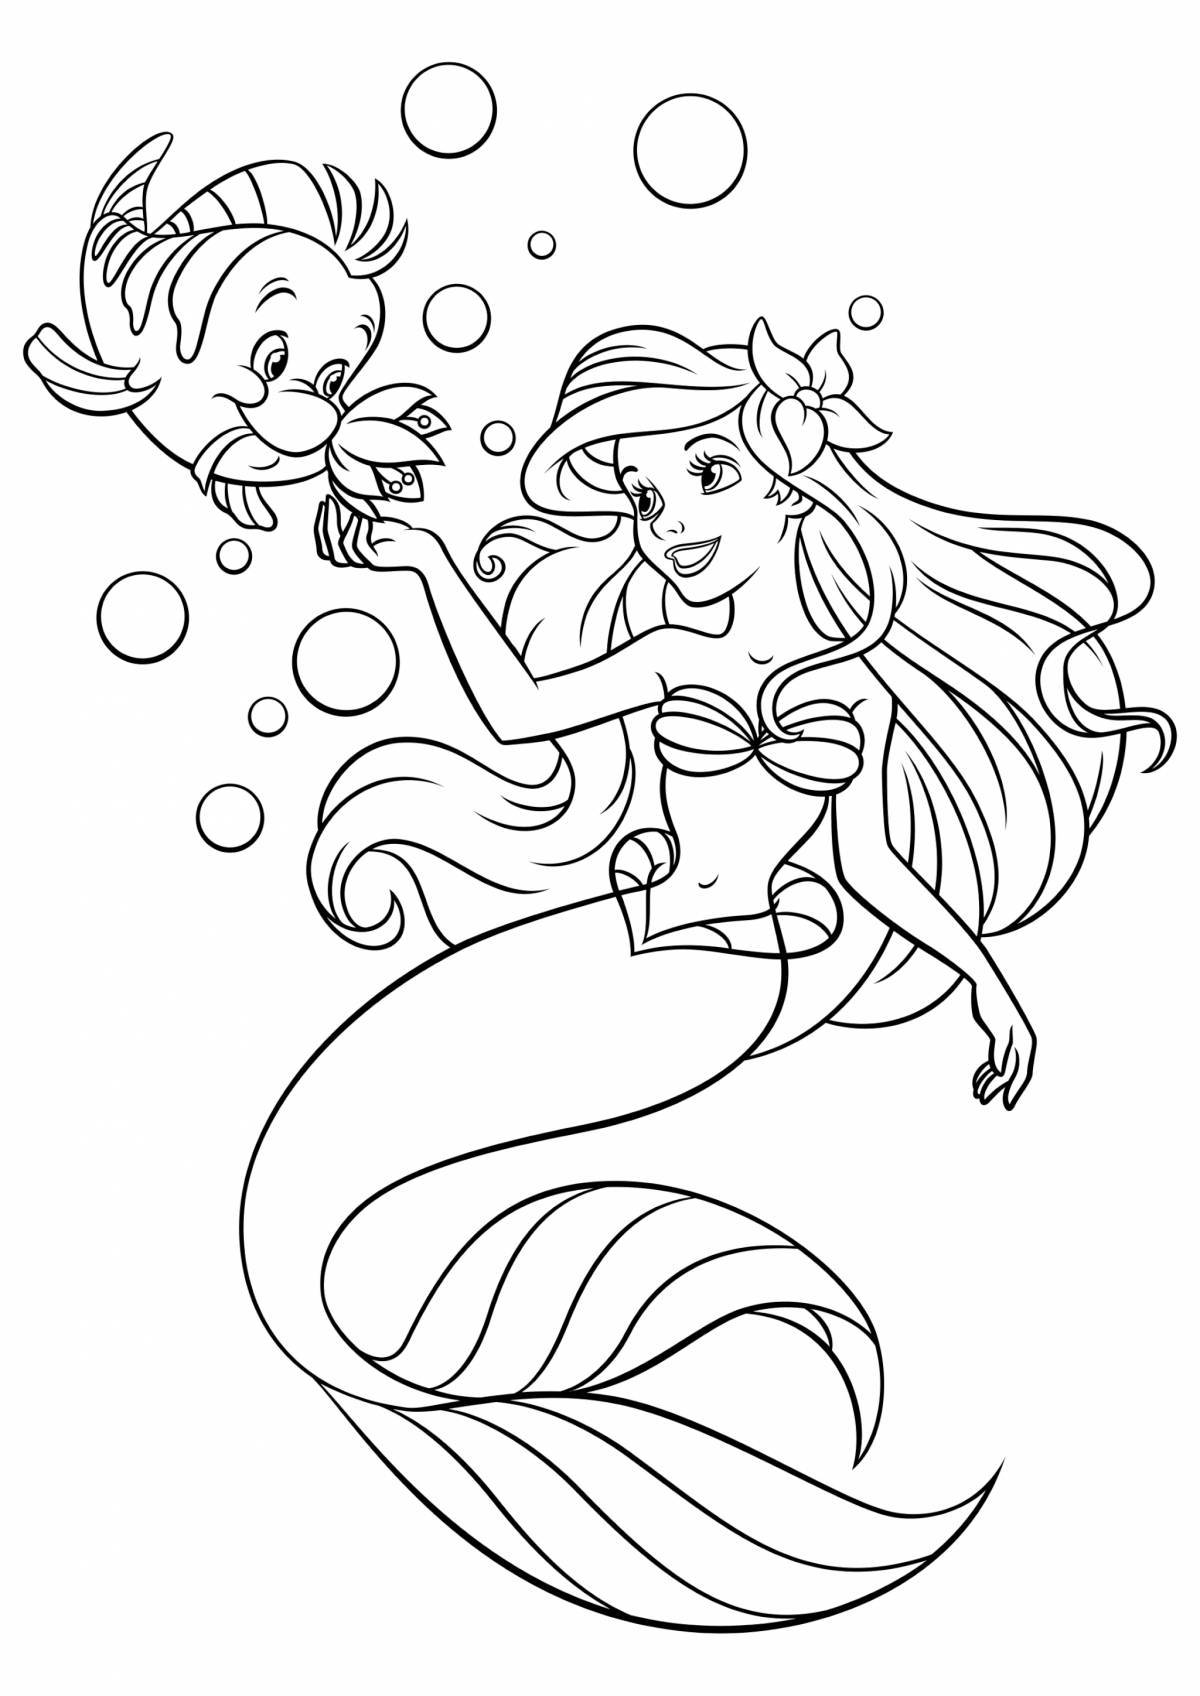 Exquisite little mermaid coloring book for kids